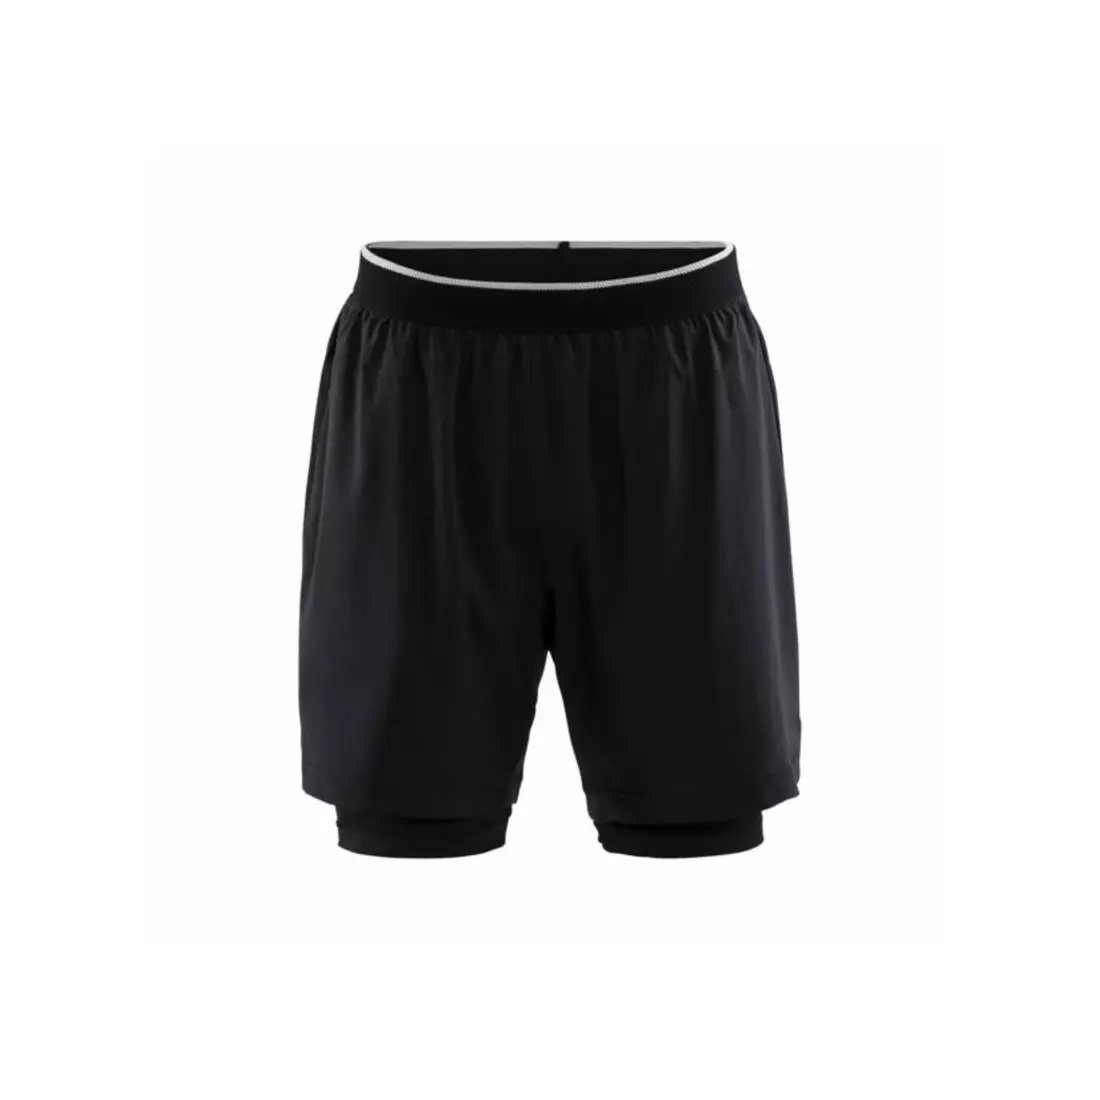 CRAFT CHARGE 2in1 men's training shorts for running 1907037-999000